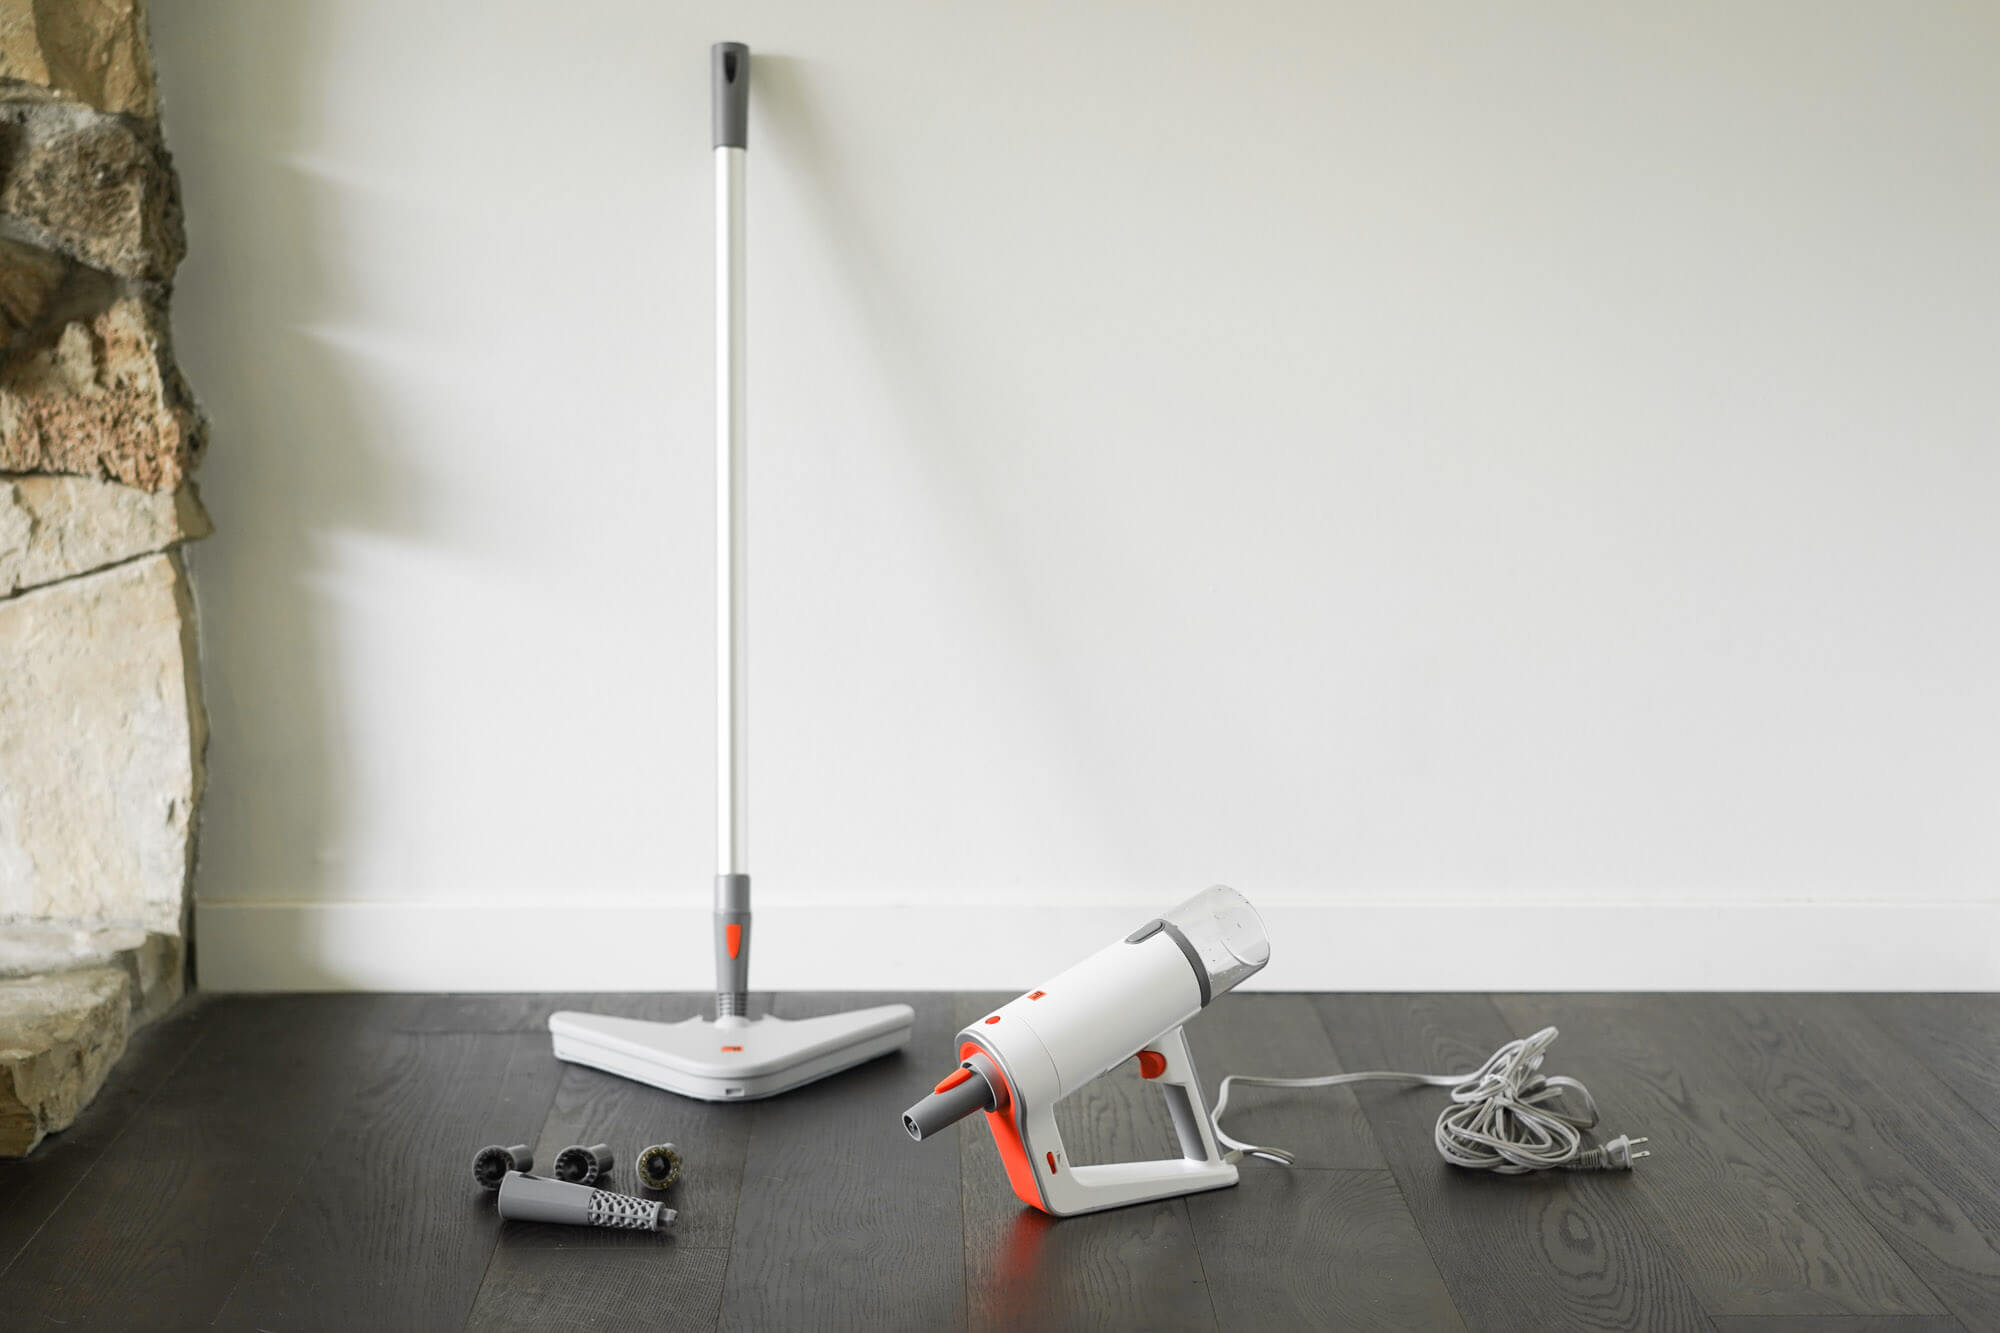 Shark Corded Hard Floor Steam Mop with XL Removable Water Tank S1000 - The  Home Depot